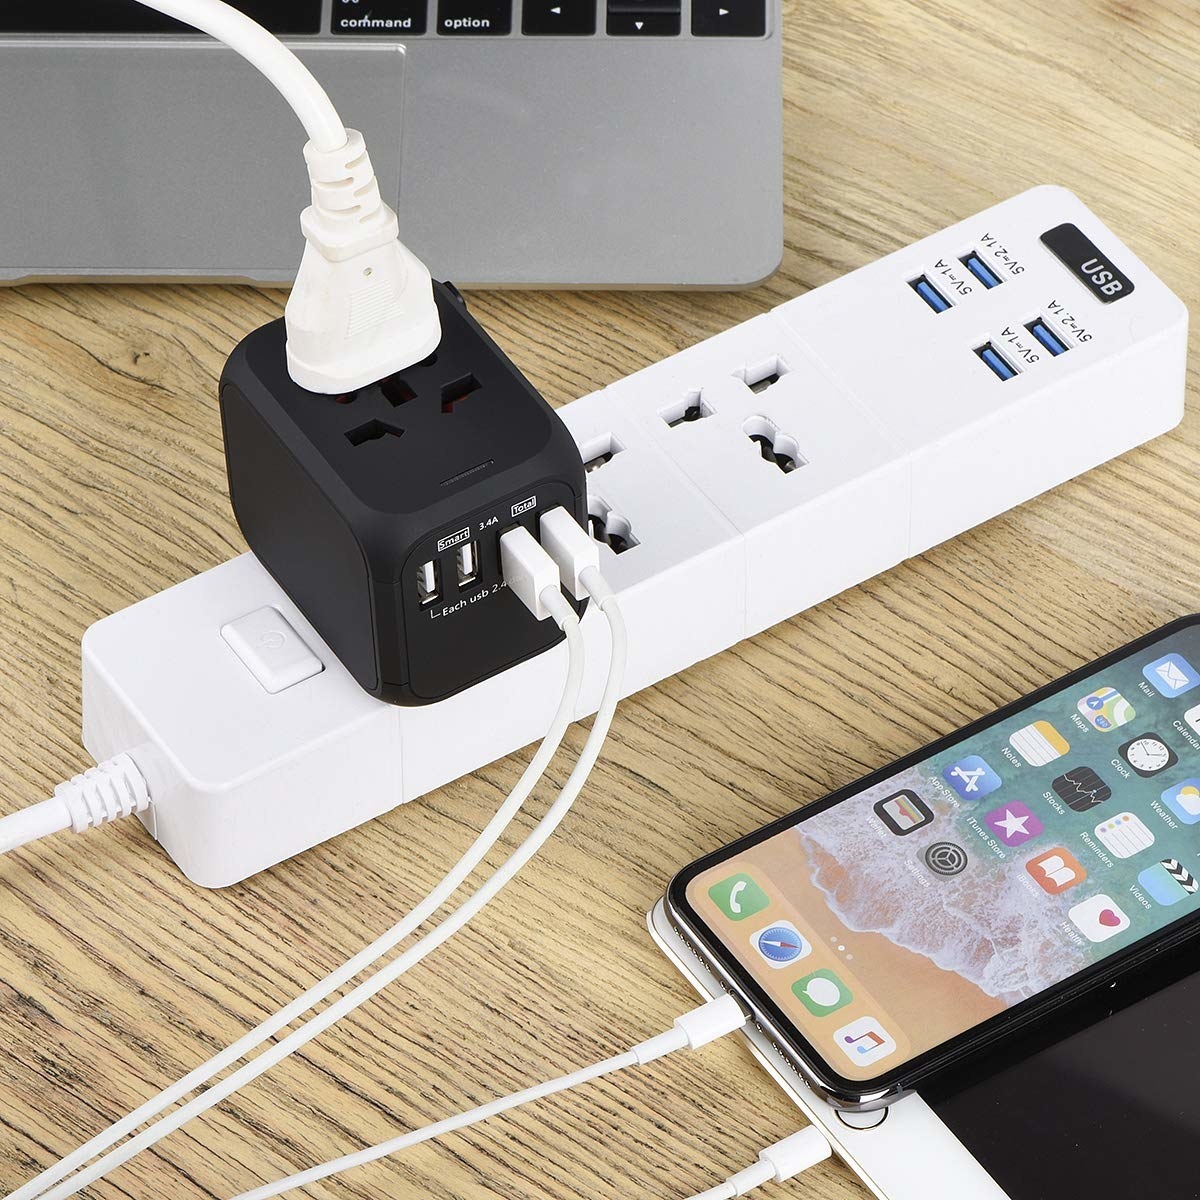 the outlet adaptor with devices plugged in